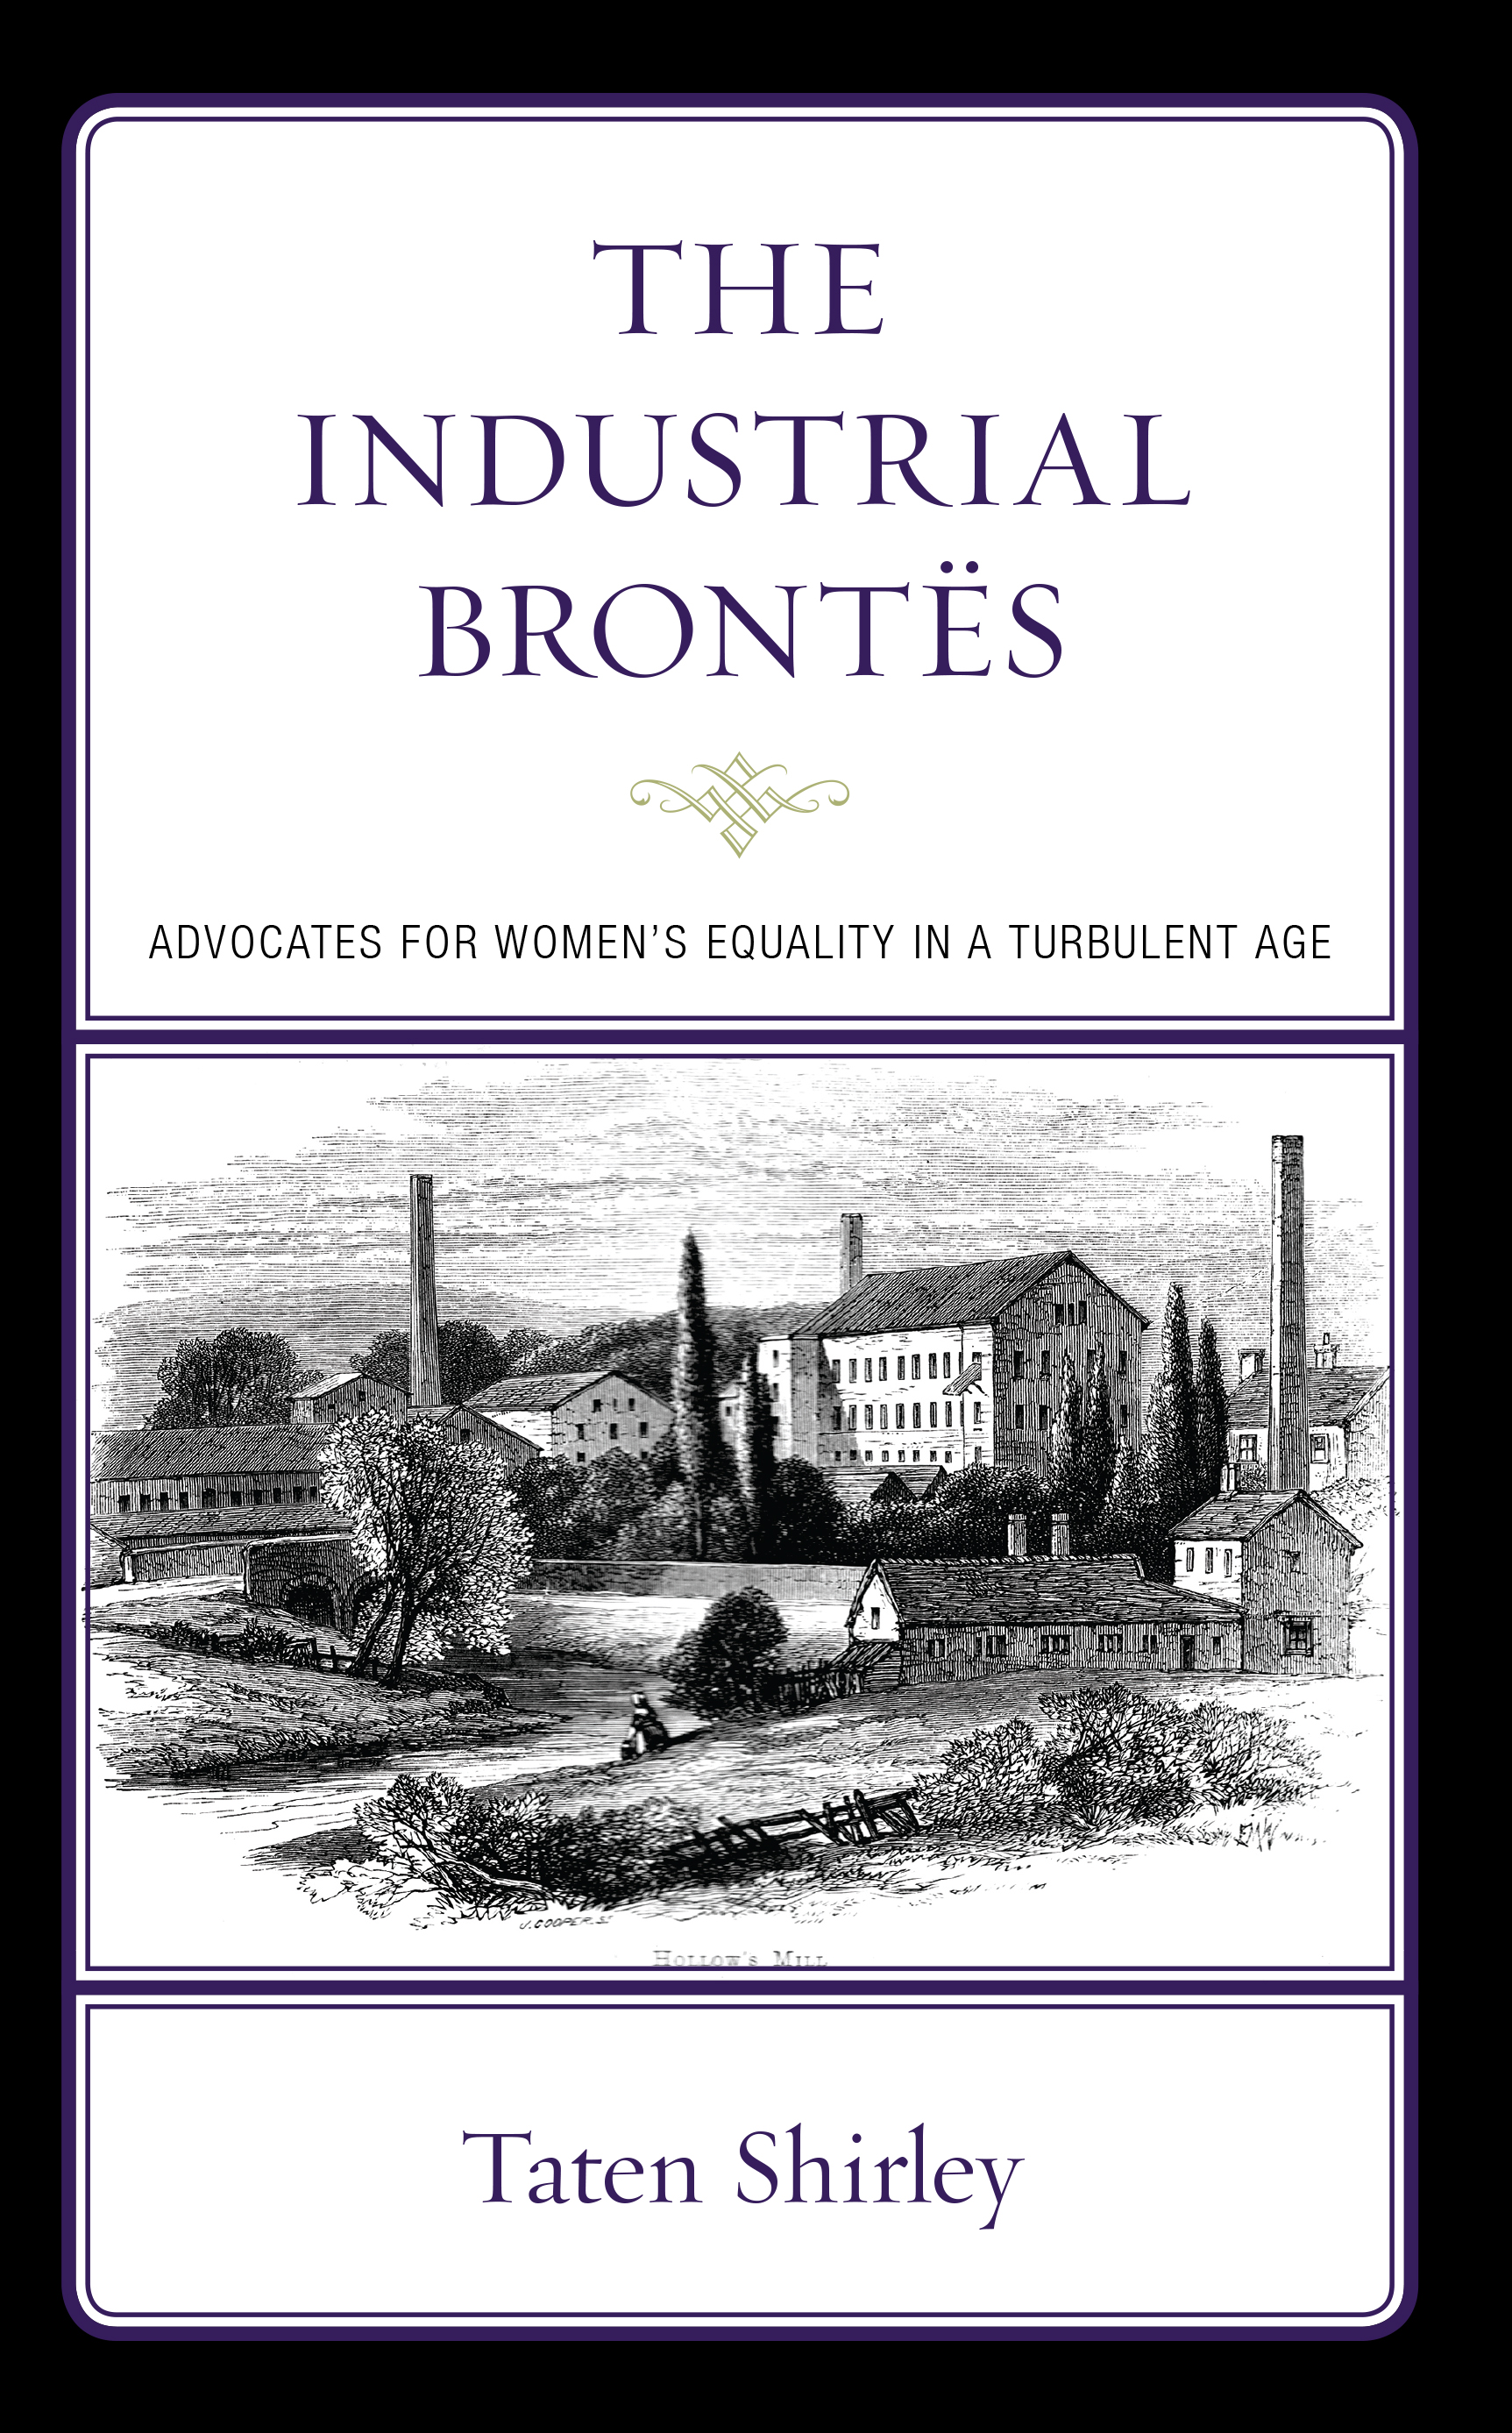 The Industrial Brontës: Advocates for Women’s Equality in a Turbulent Age